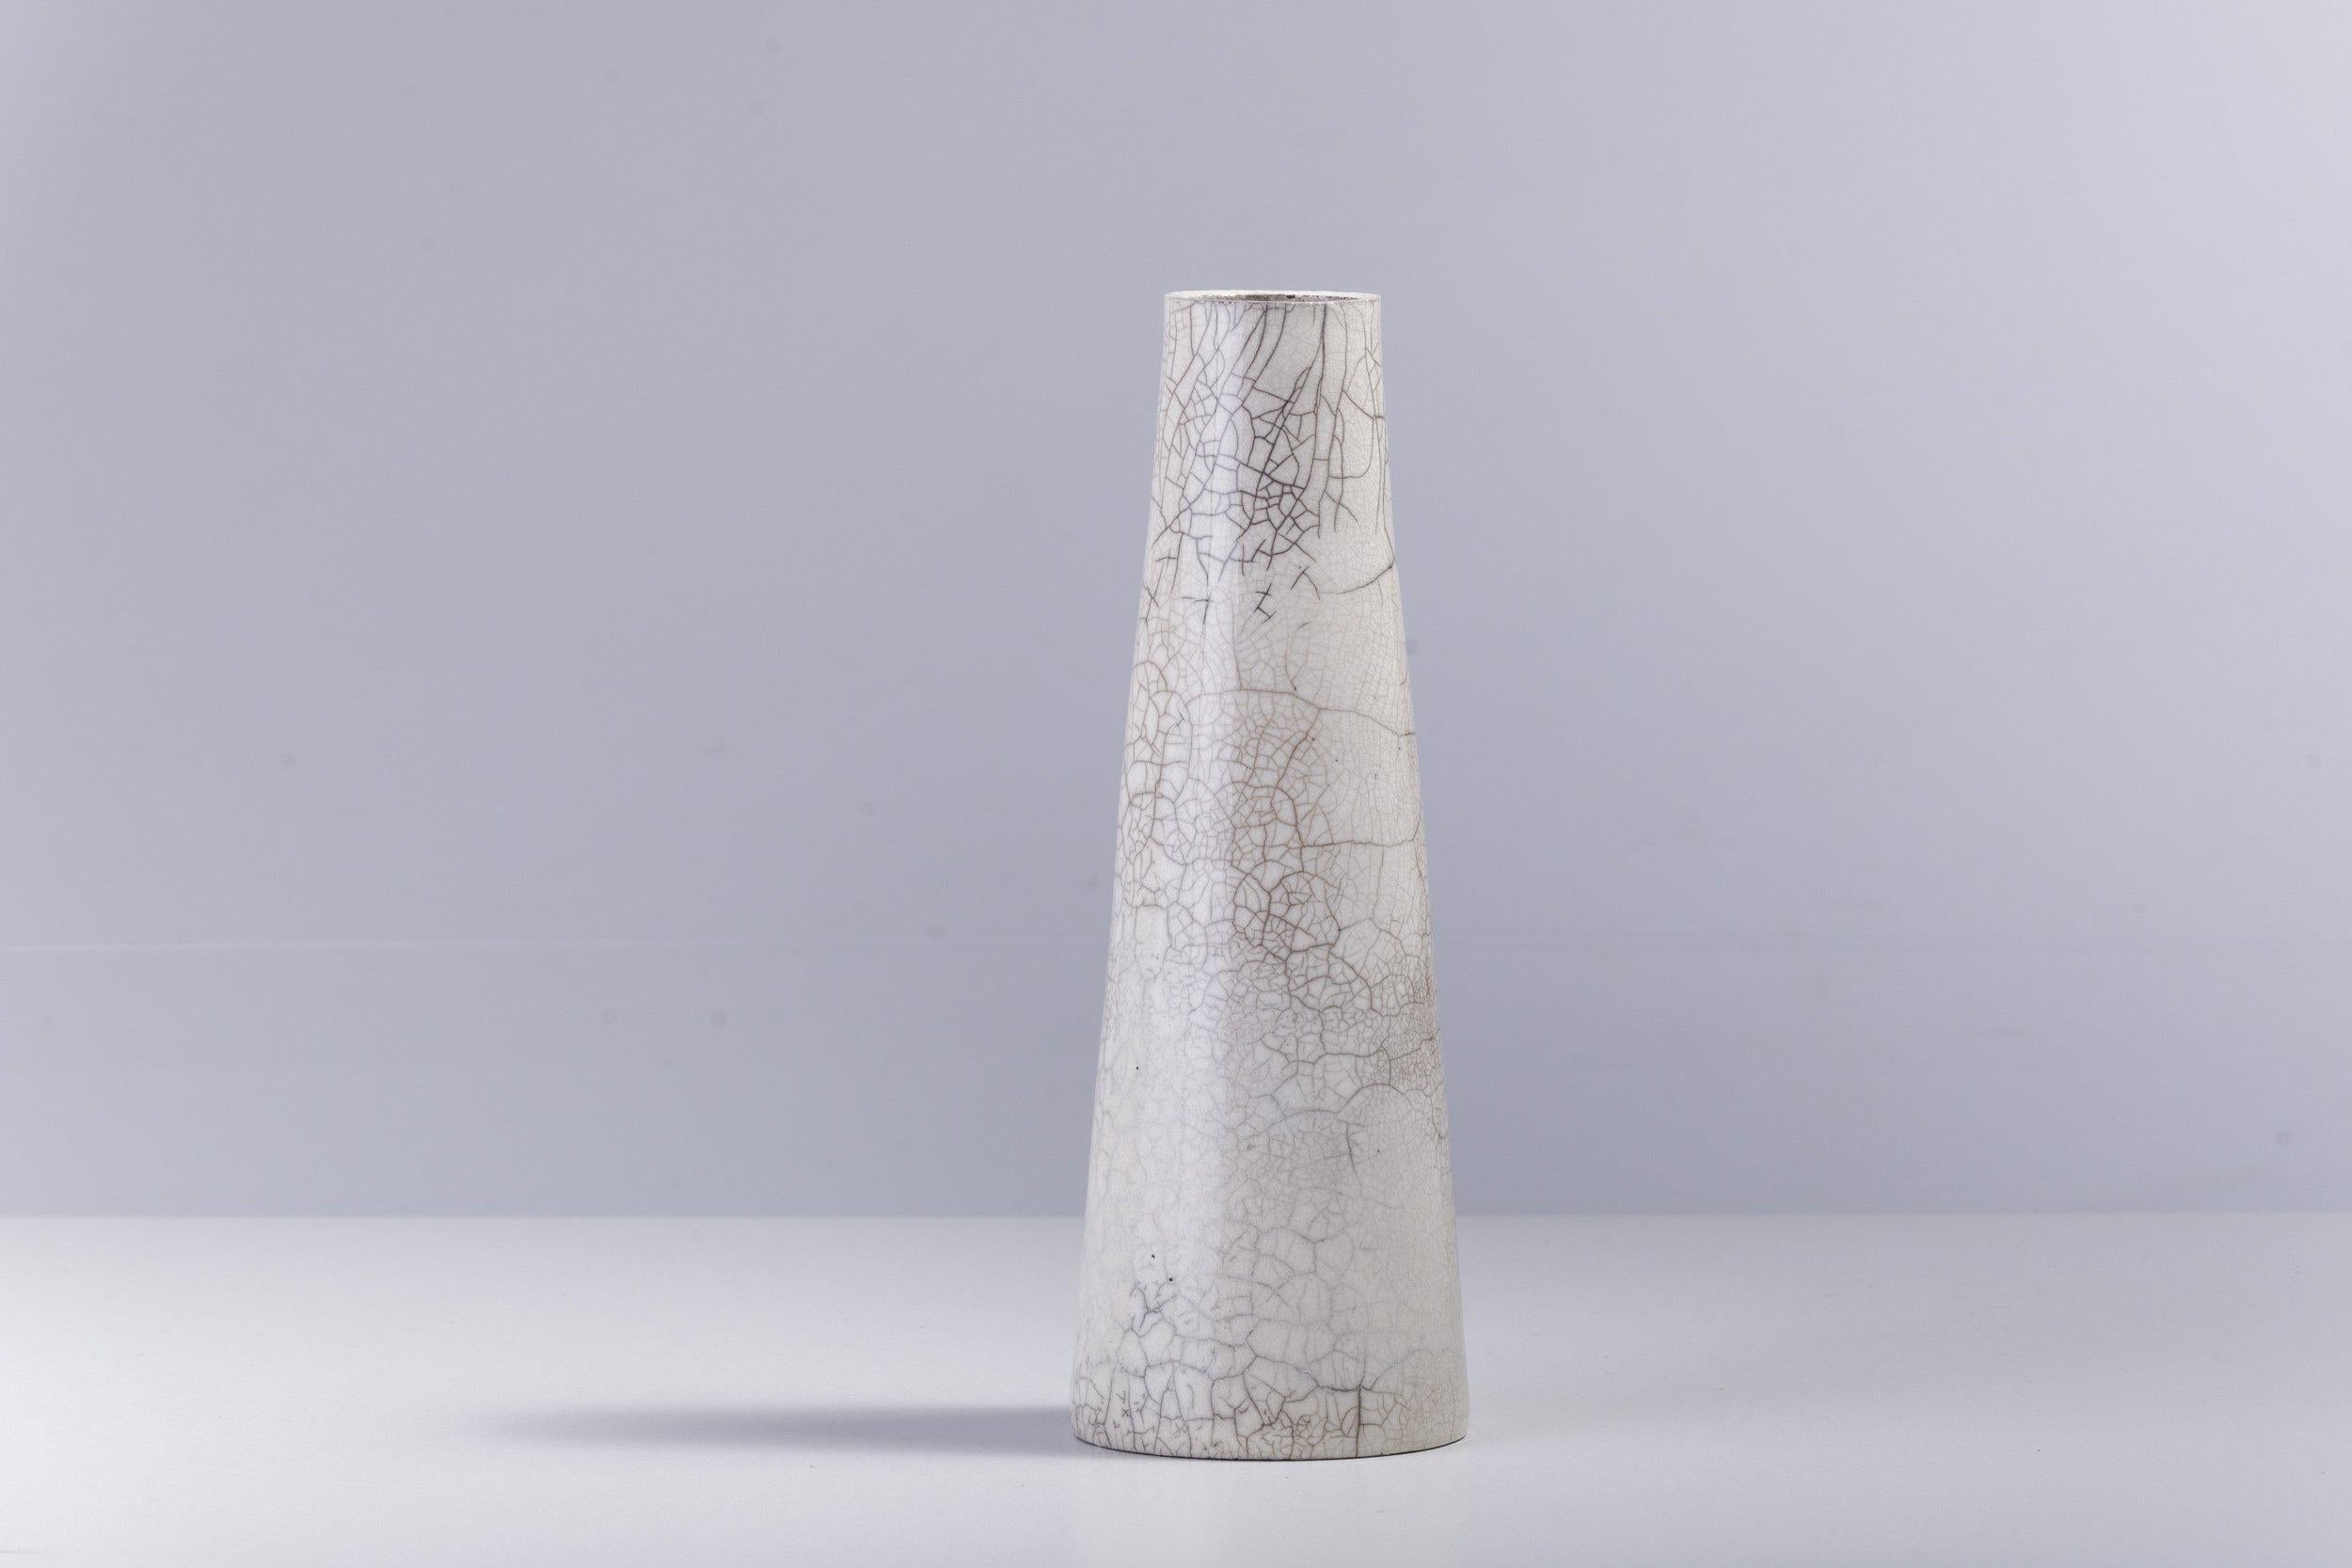 Hana vertical

A sleek and modern design of unprecedented sophistication, this vase's clean and essential character is enhanced with neutral colors transformed into a striking play of light and dark patchworks by the Japanese Raku ceramic firing